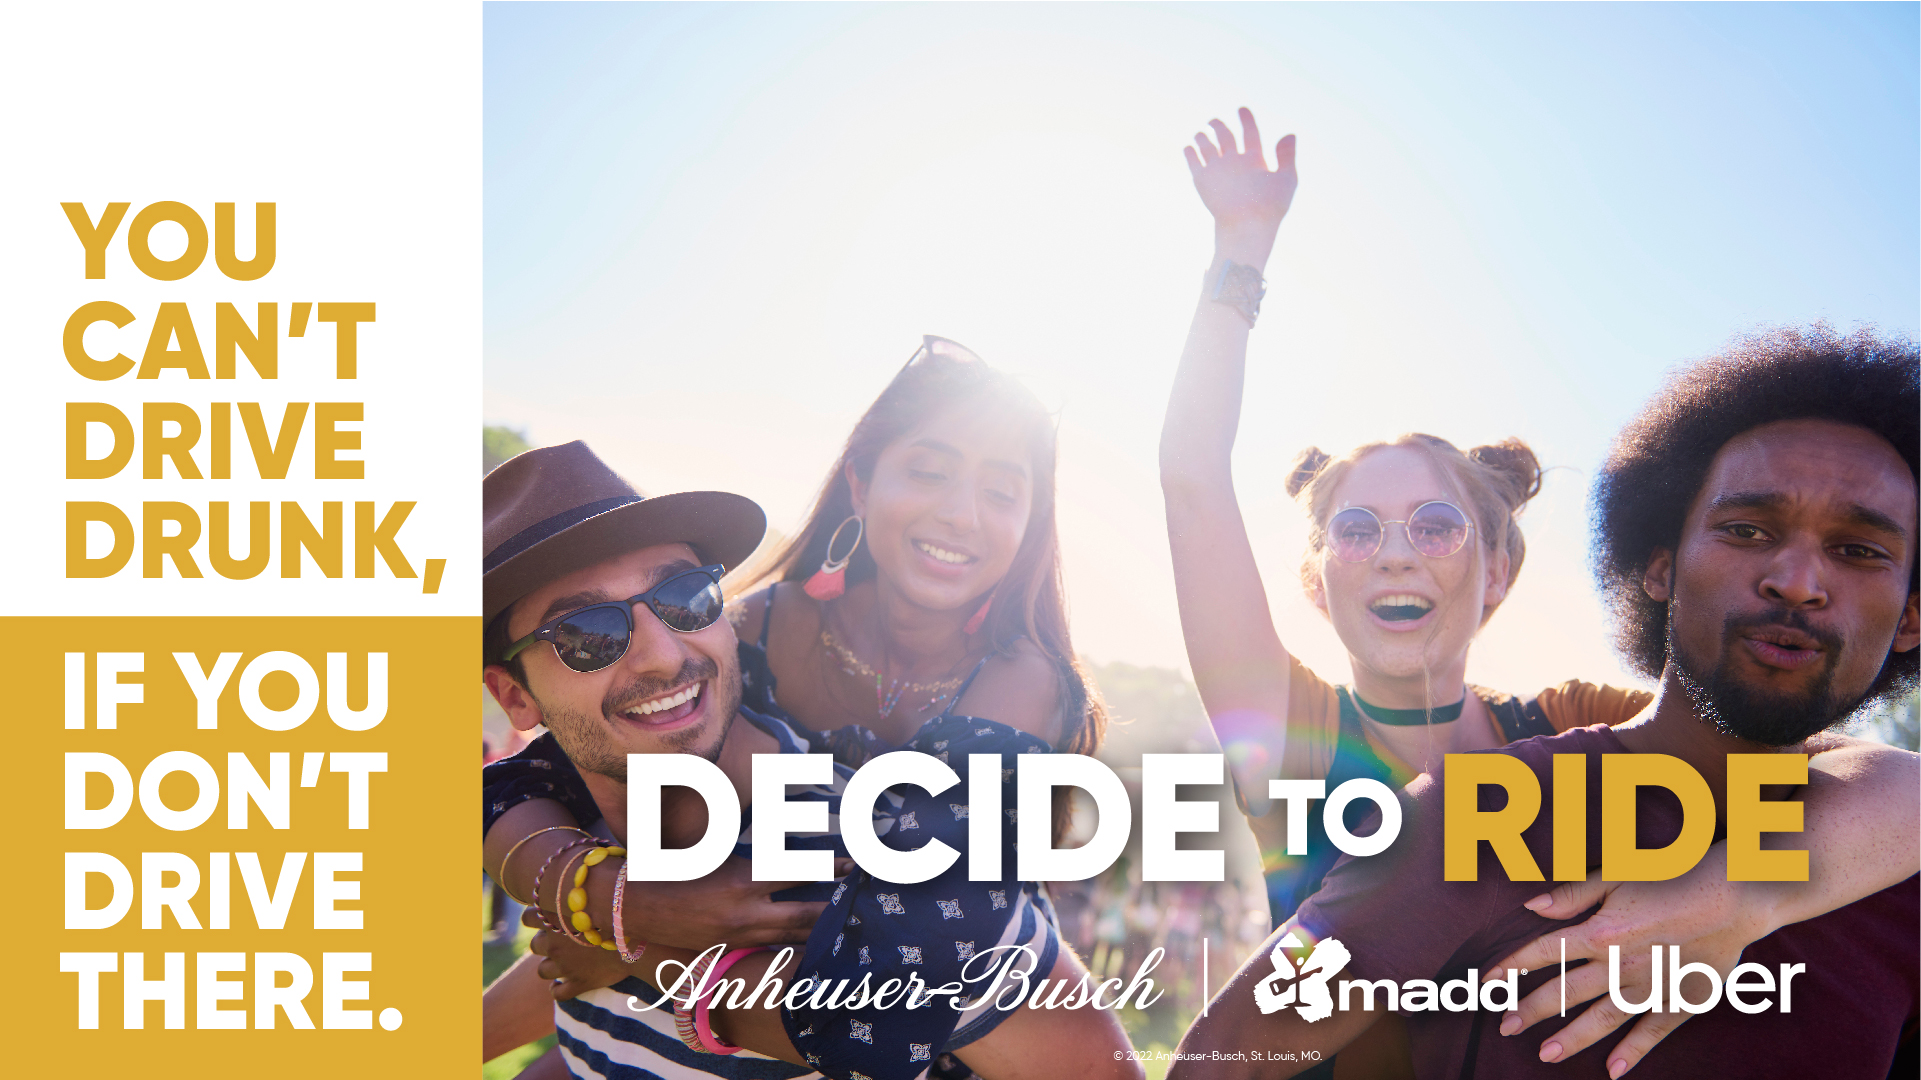 Anheuser-Busch, MADD and Uber Partner to Help Prevent Drunk Driving in St. Louis this Summer Through the Decide to Ride Campaign